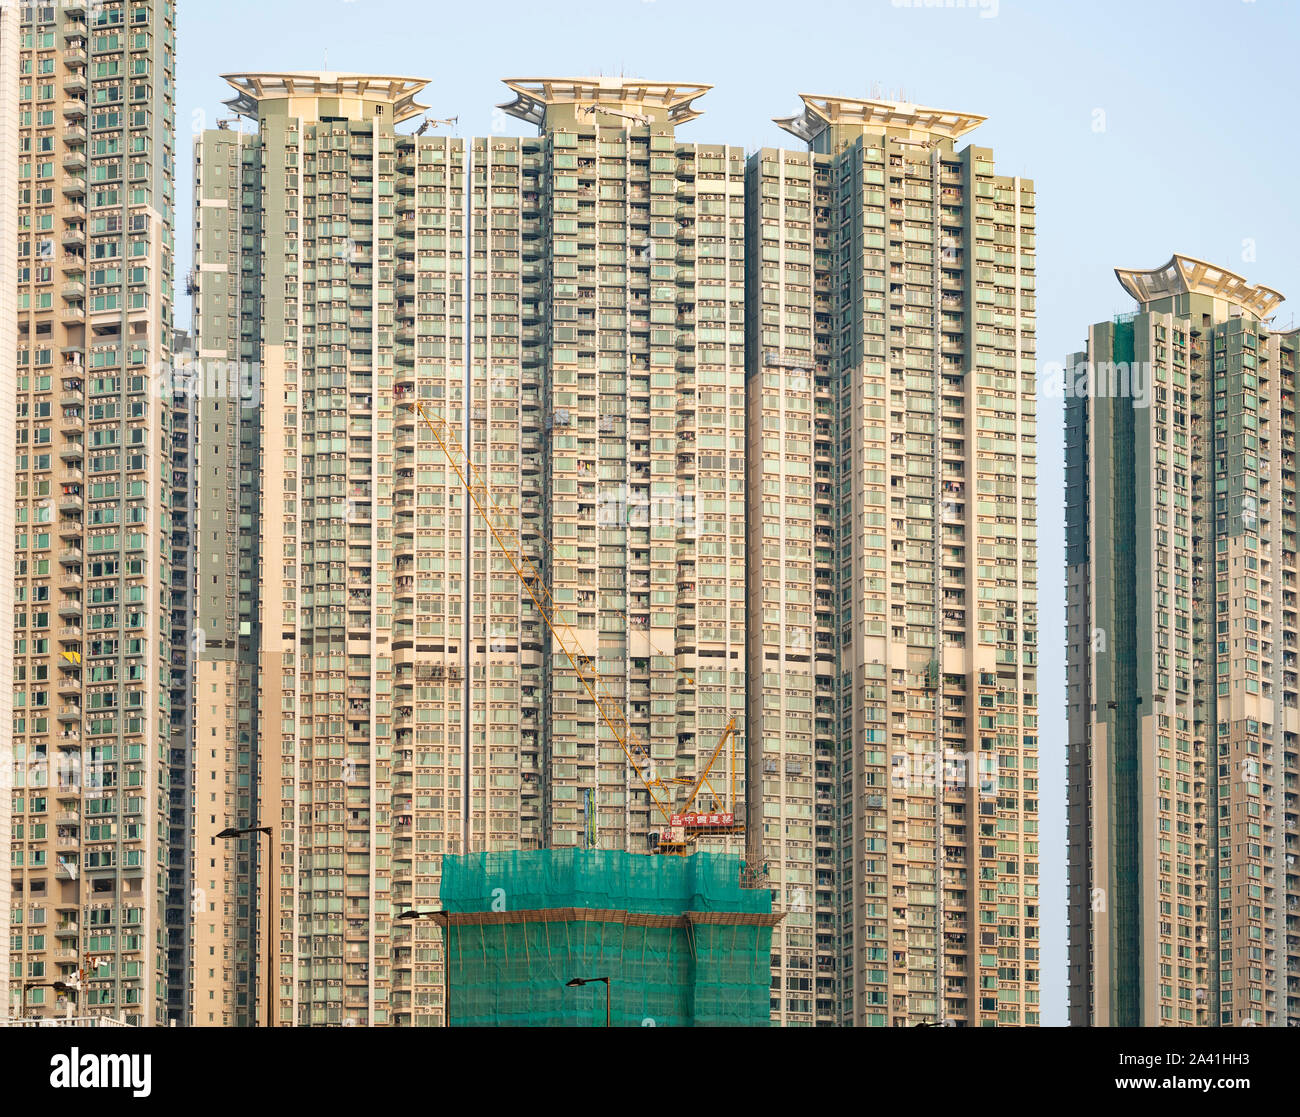 Facade of dense urban high-rise apartment buildings in LOHAS Park new housing estate in New Territories of Hong Kong, China. Stock Photo